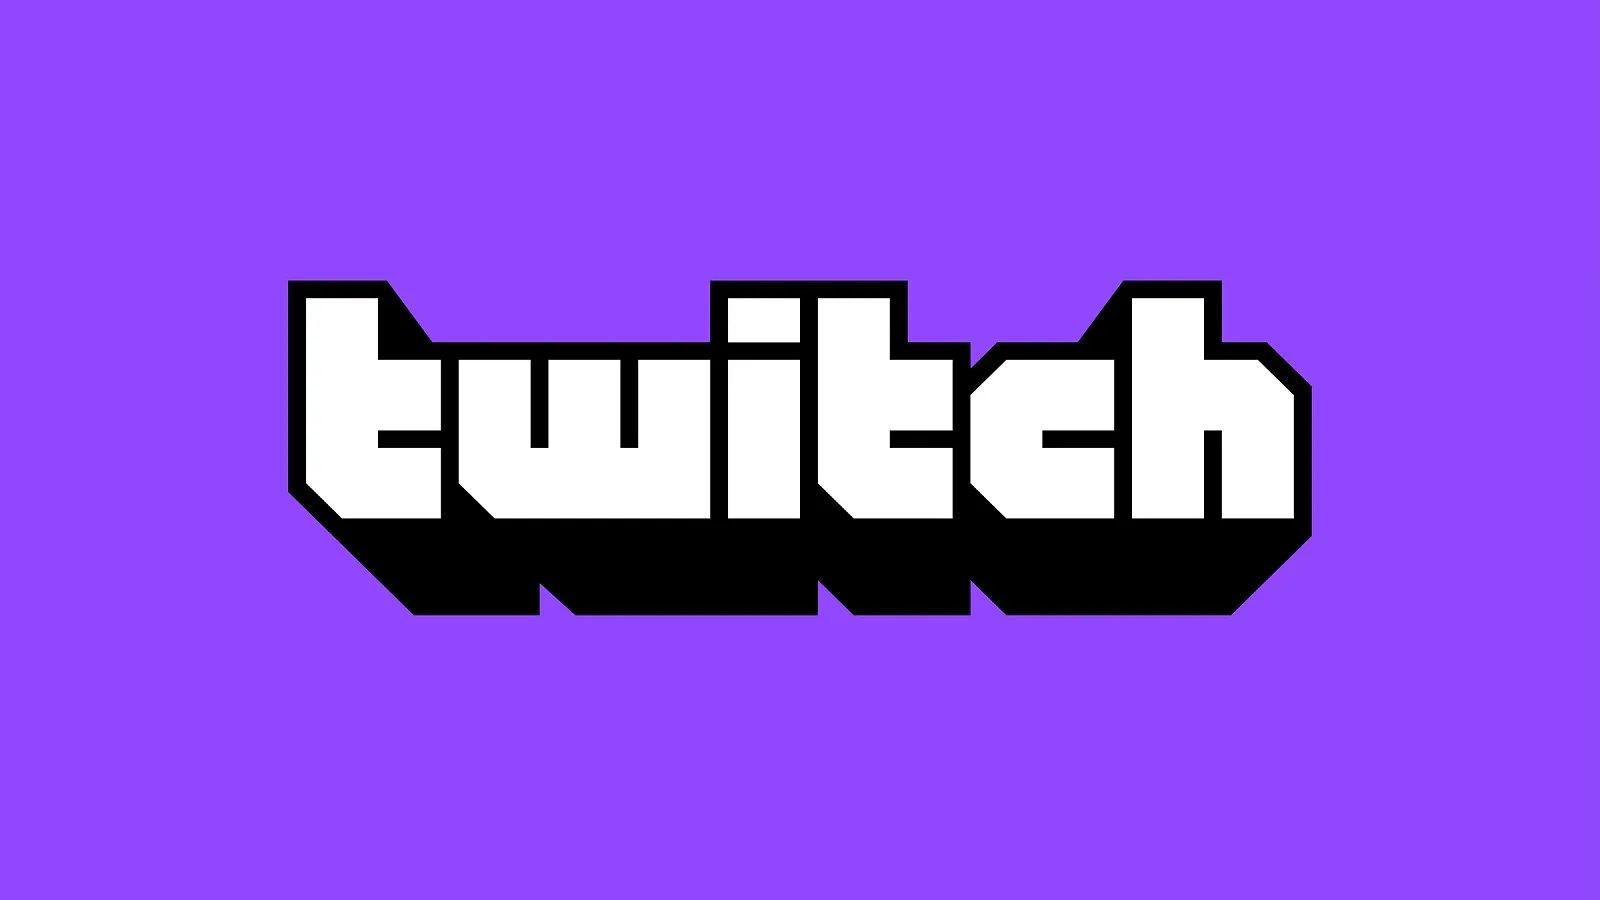 twitch-reverses-course-on-artistic-nudity-policy-banning-depictions-of-nudity-again